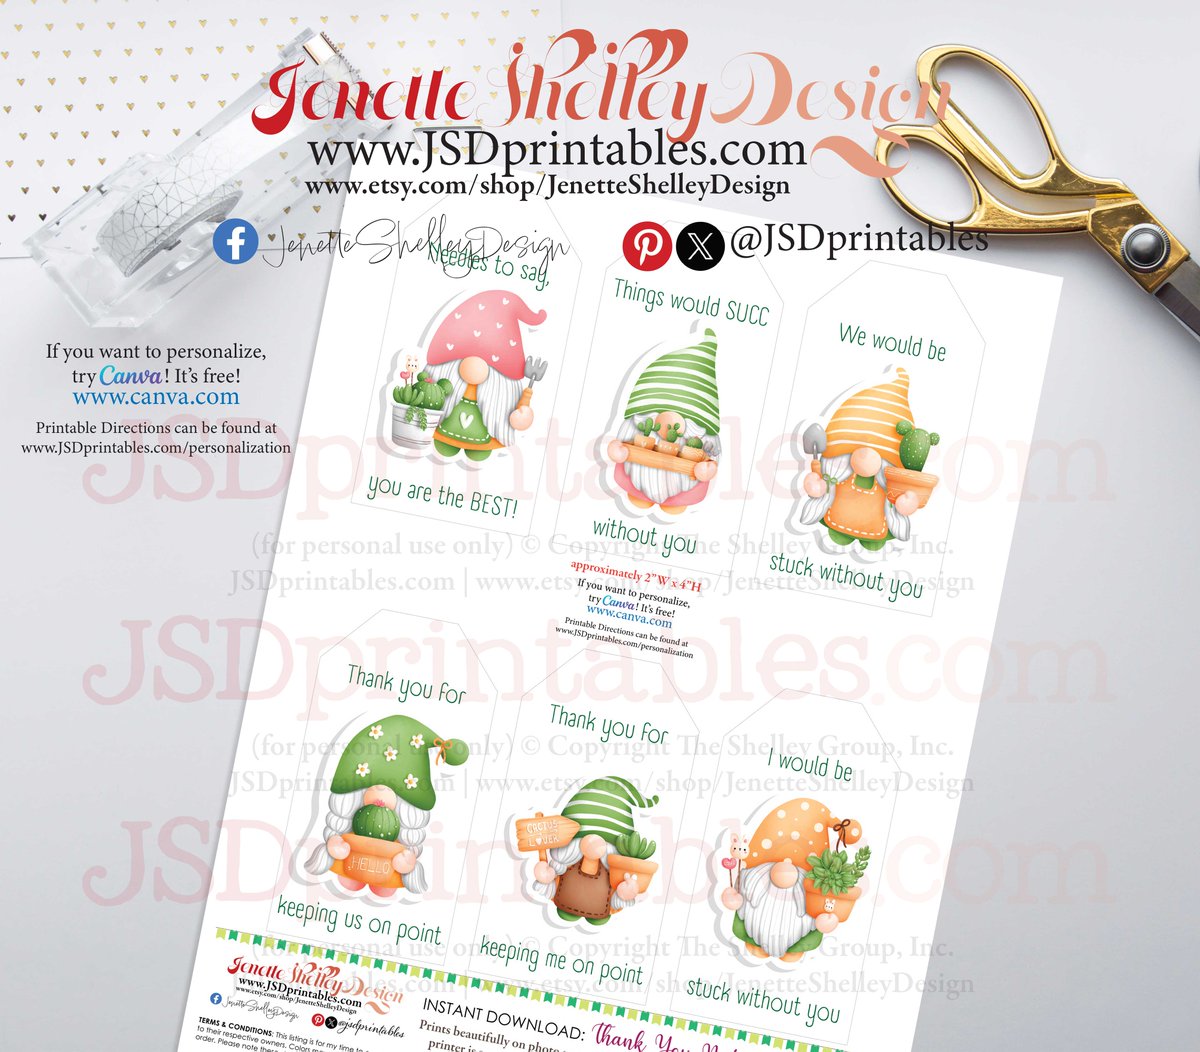 Add a touch of desert charm to your gifts with our Cactus Gnomes printable digital gift tags! jsdprintables.com/product-page/c… @jsdprintables #printables #shopsmall #caketoppers #gifts #gifttags #instantdownload #cactus #gnomes #succulents #teacherlife #coworkergifts